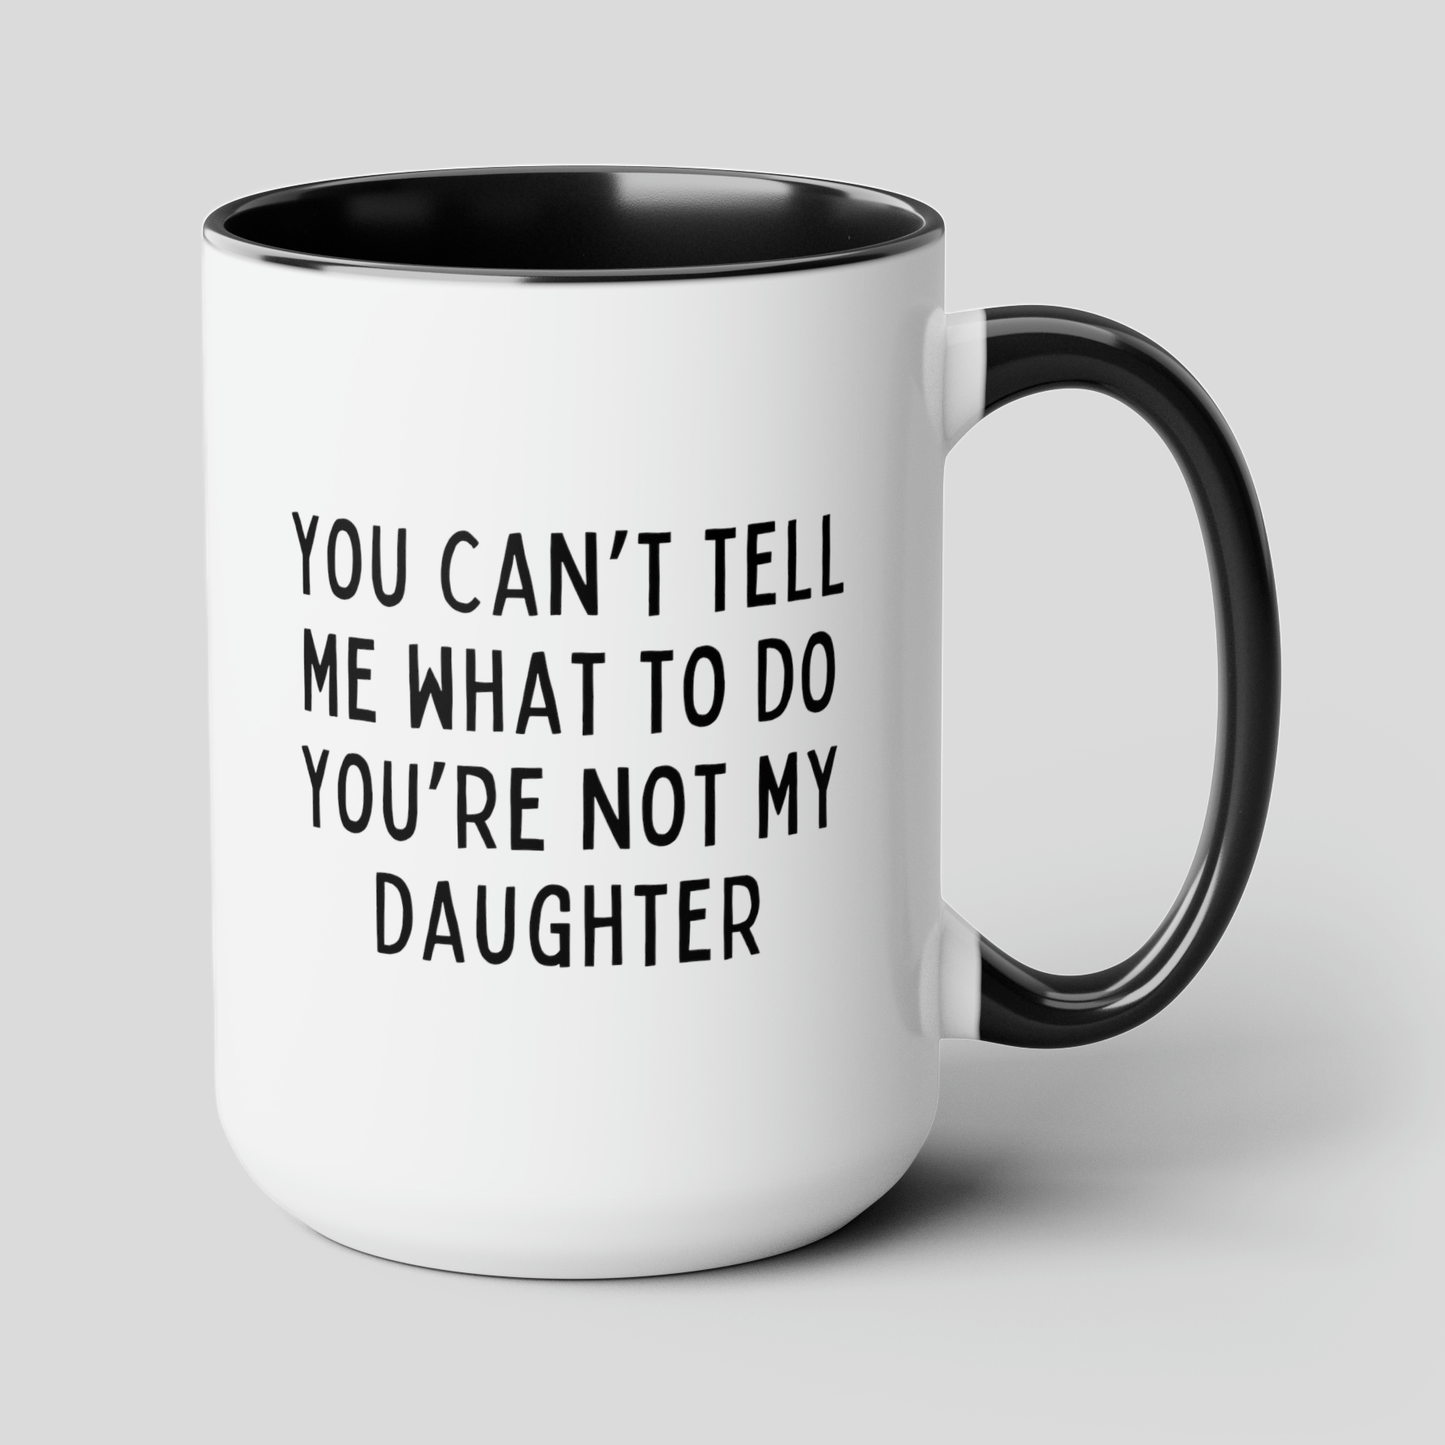 You Can't Tell Me What To Do You're Not My Daughter 15oz white with black accent funny large coffee mug gift for dad fathers day grandfather grandpa waveywares wavey wares wavywares wavy wares cover